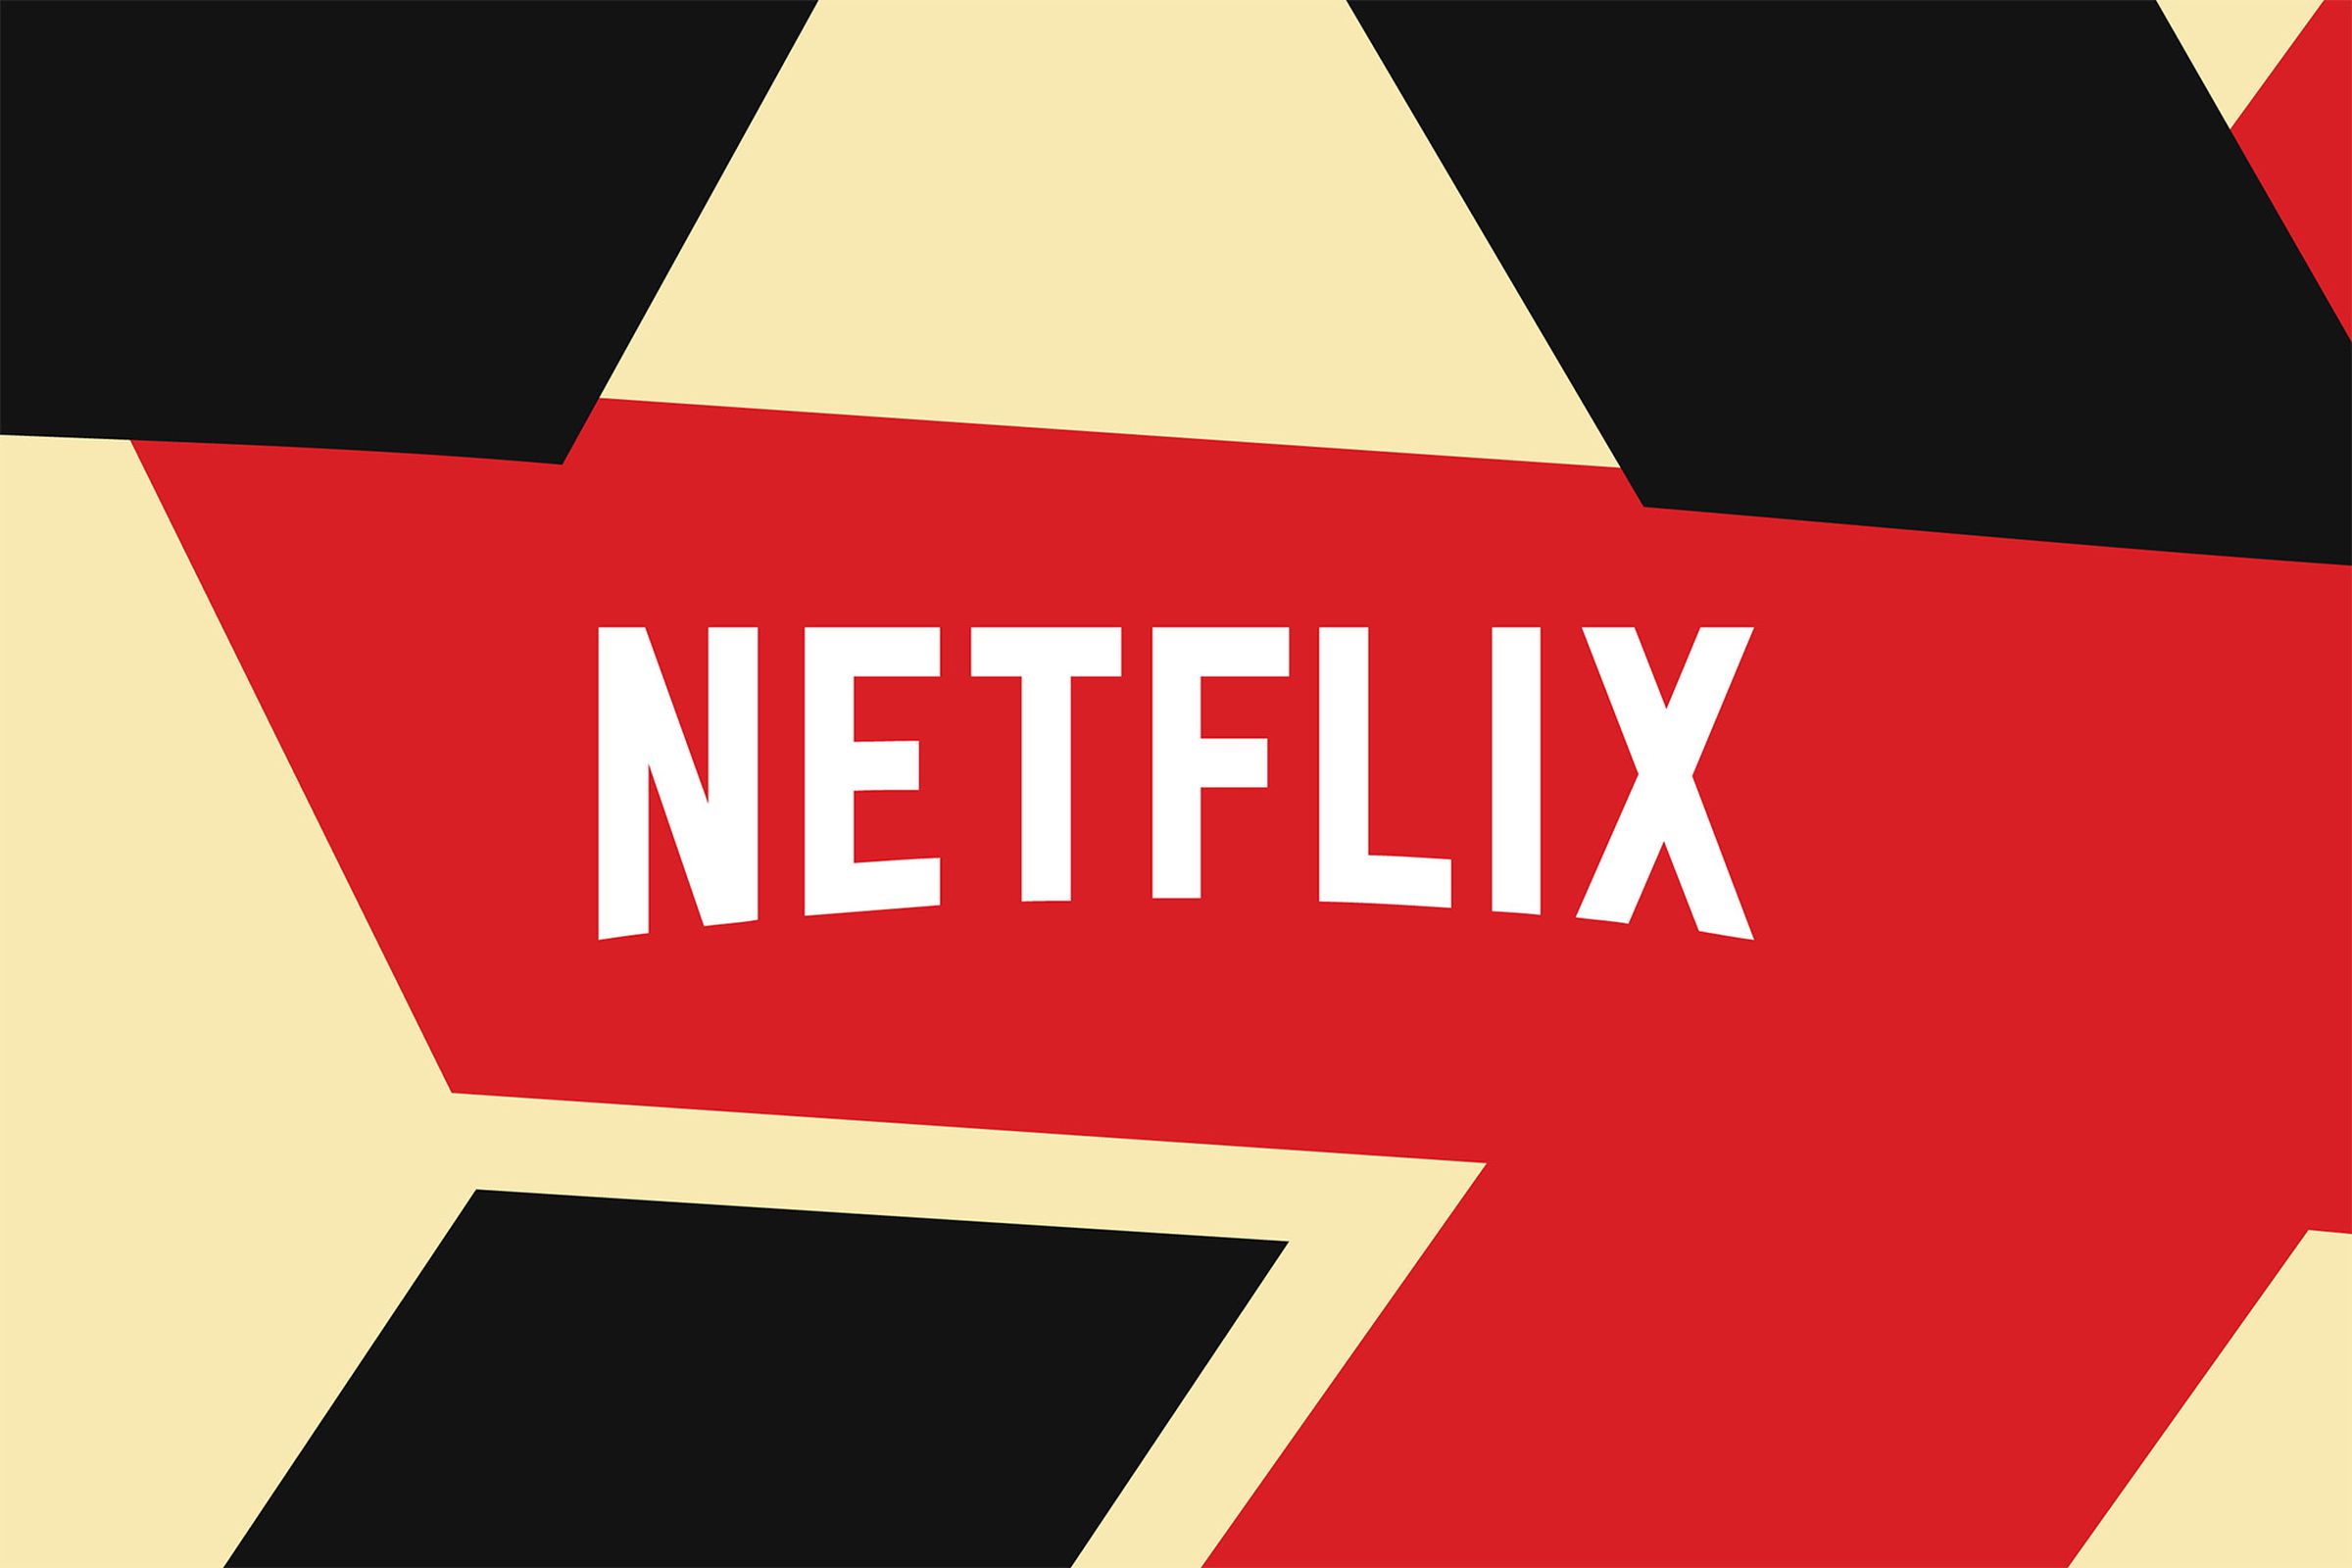 Netflix streaming turns 15 today, which explains its non-committal temperament